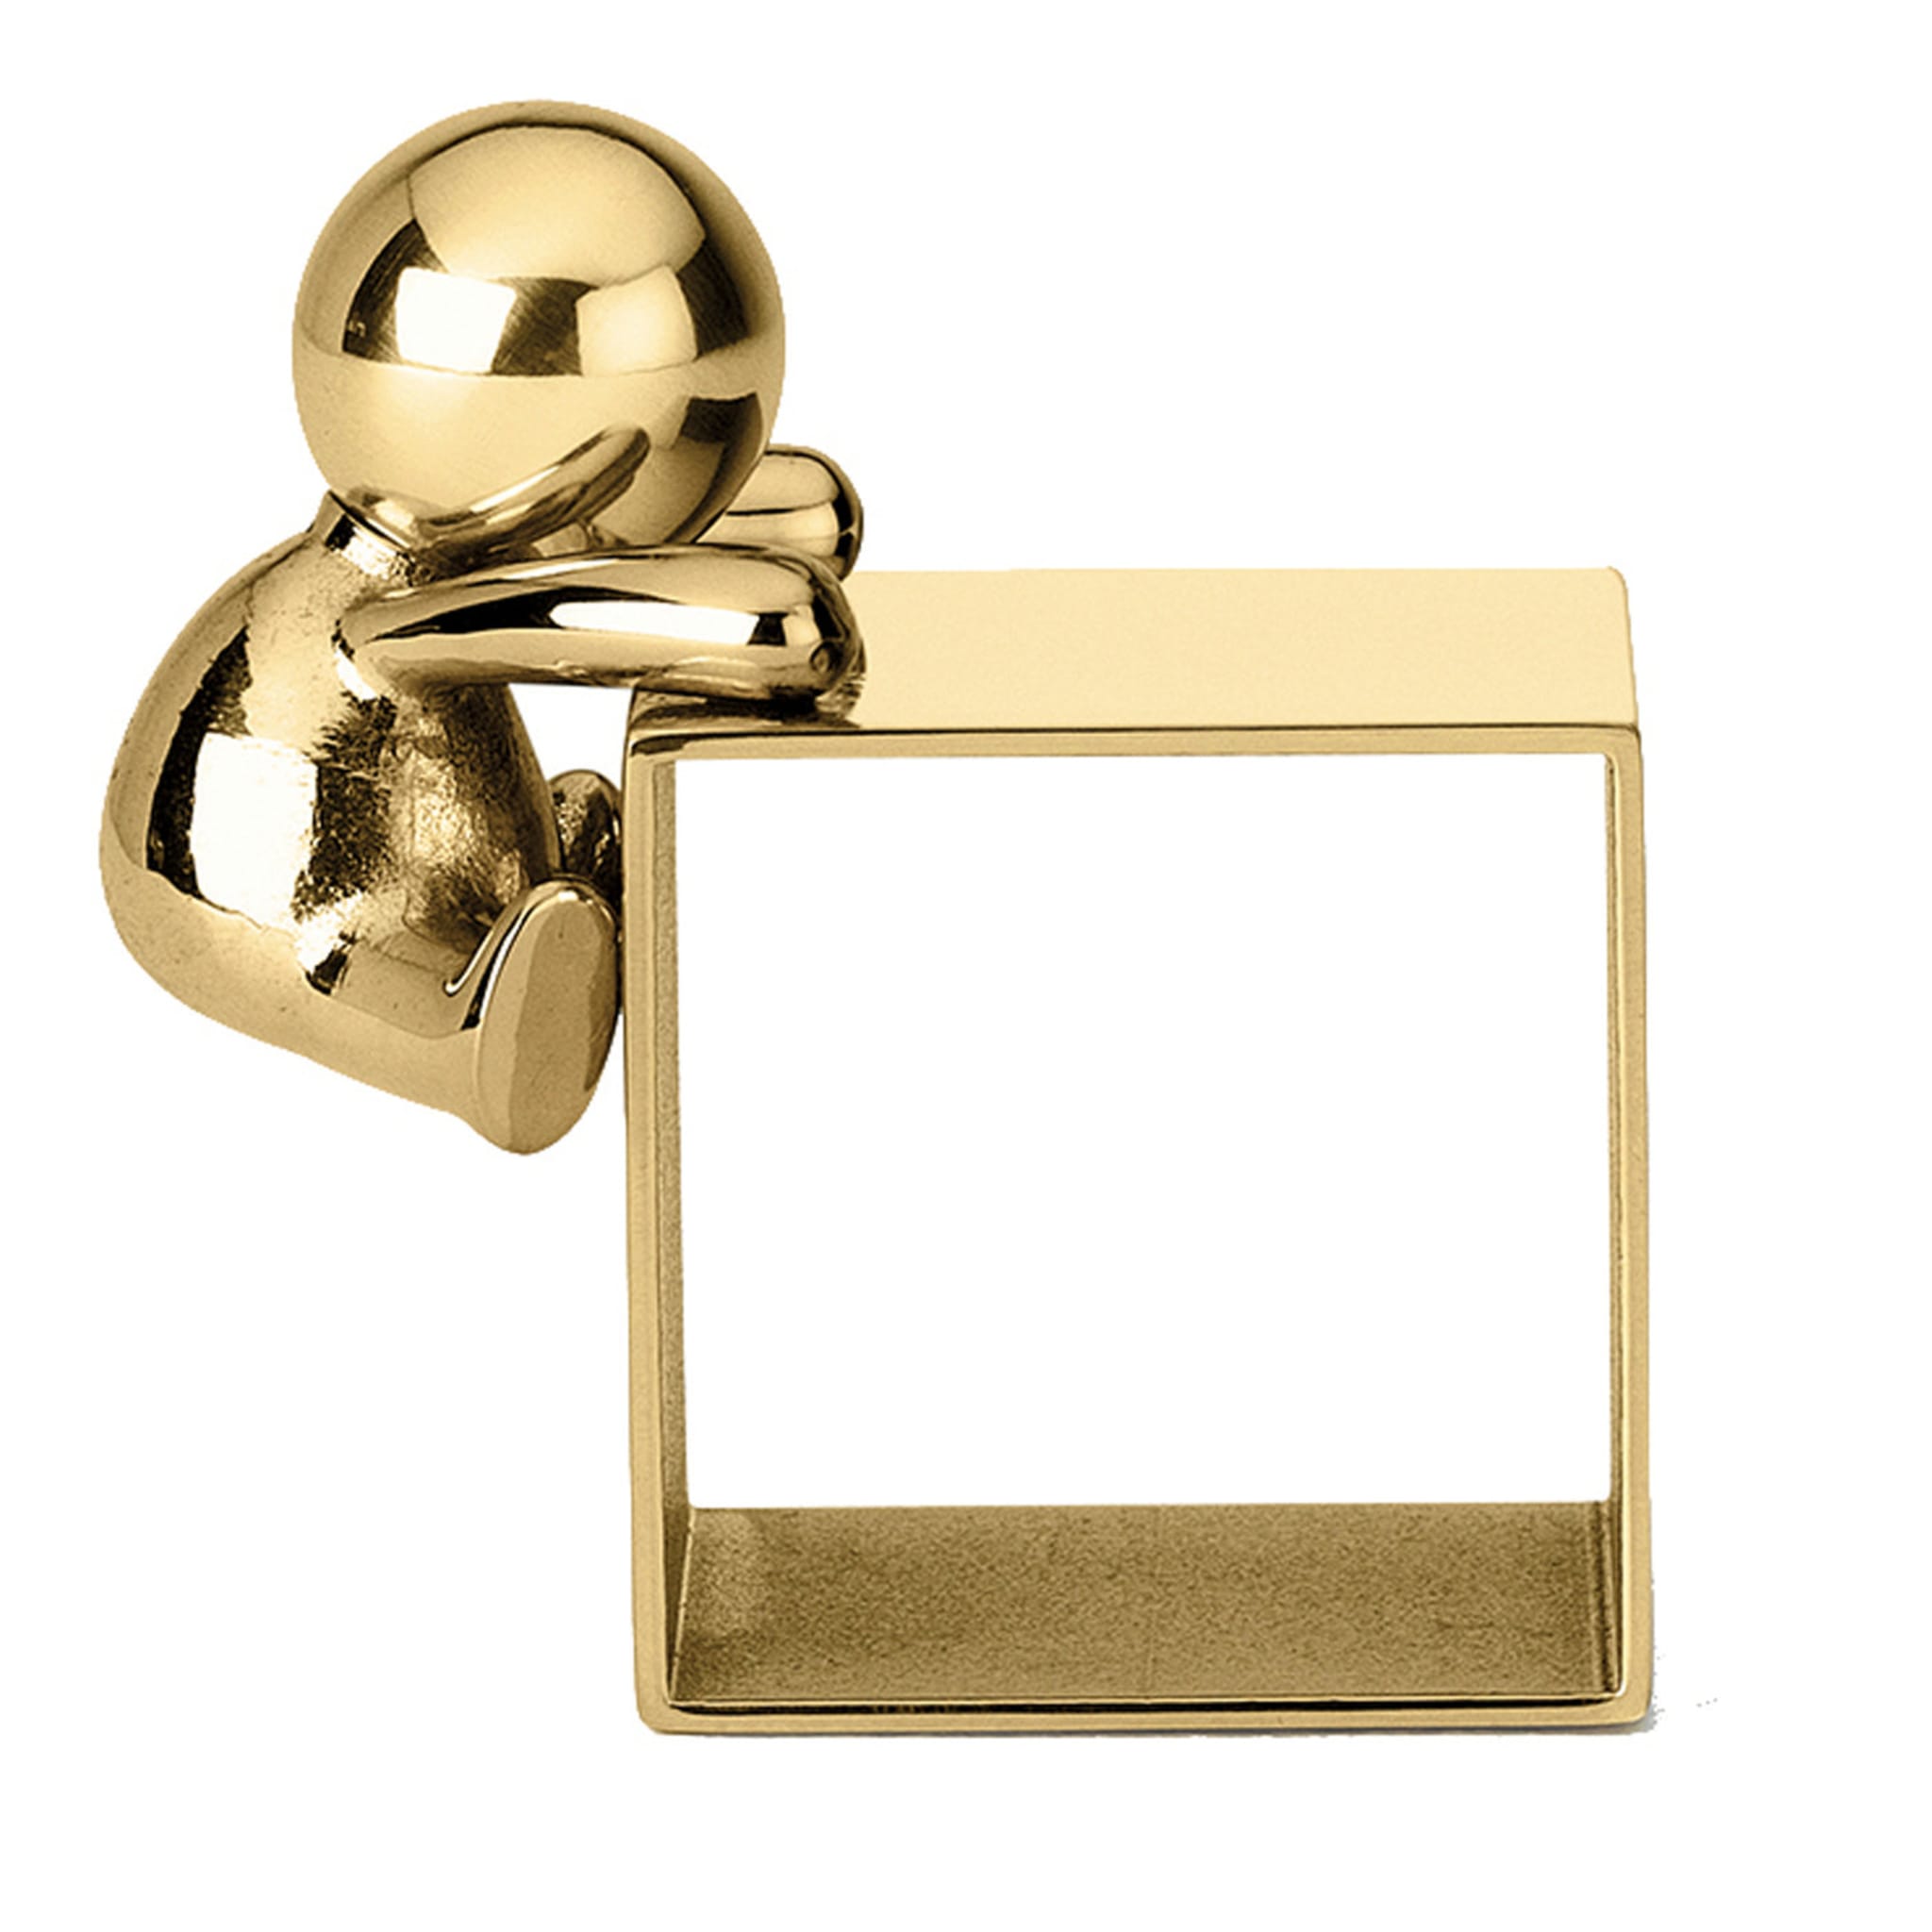 Omini Climbing Napkin Ring in Polished Brass By Stefano Giovannoni - Main view